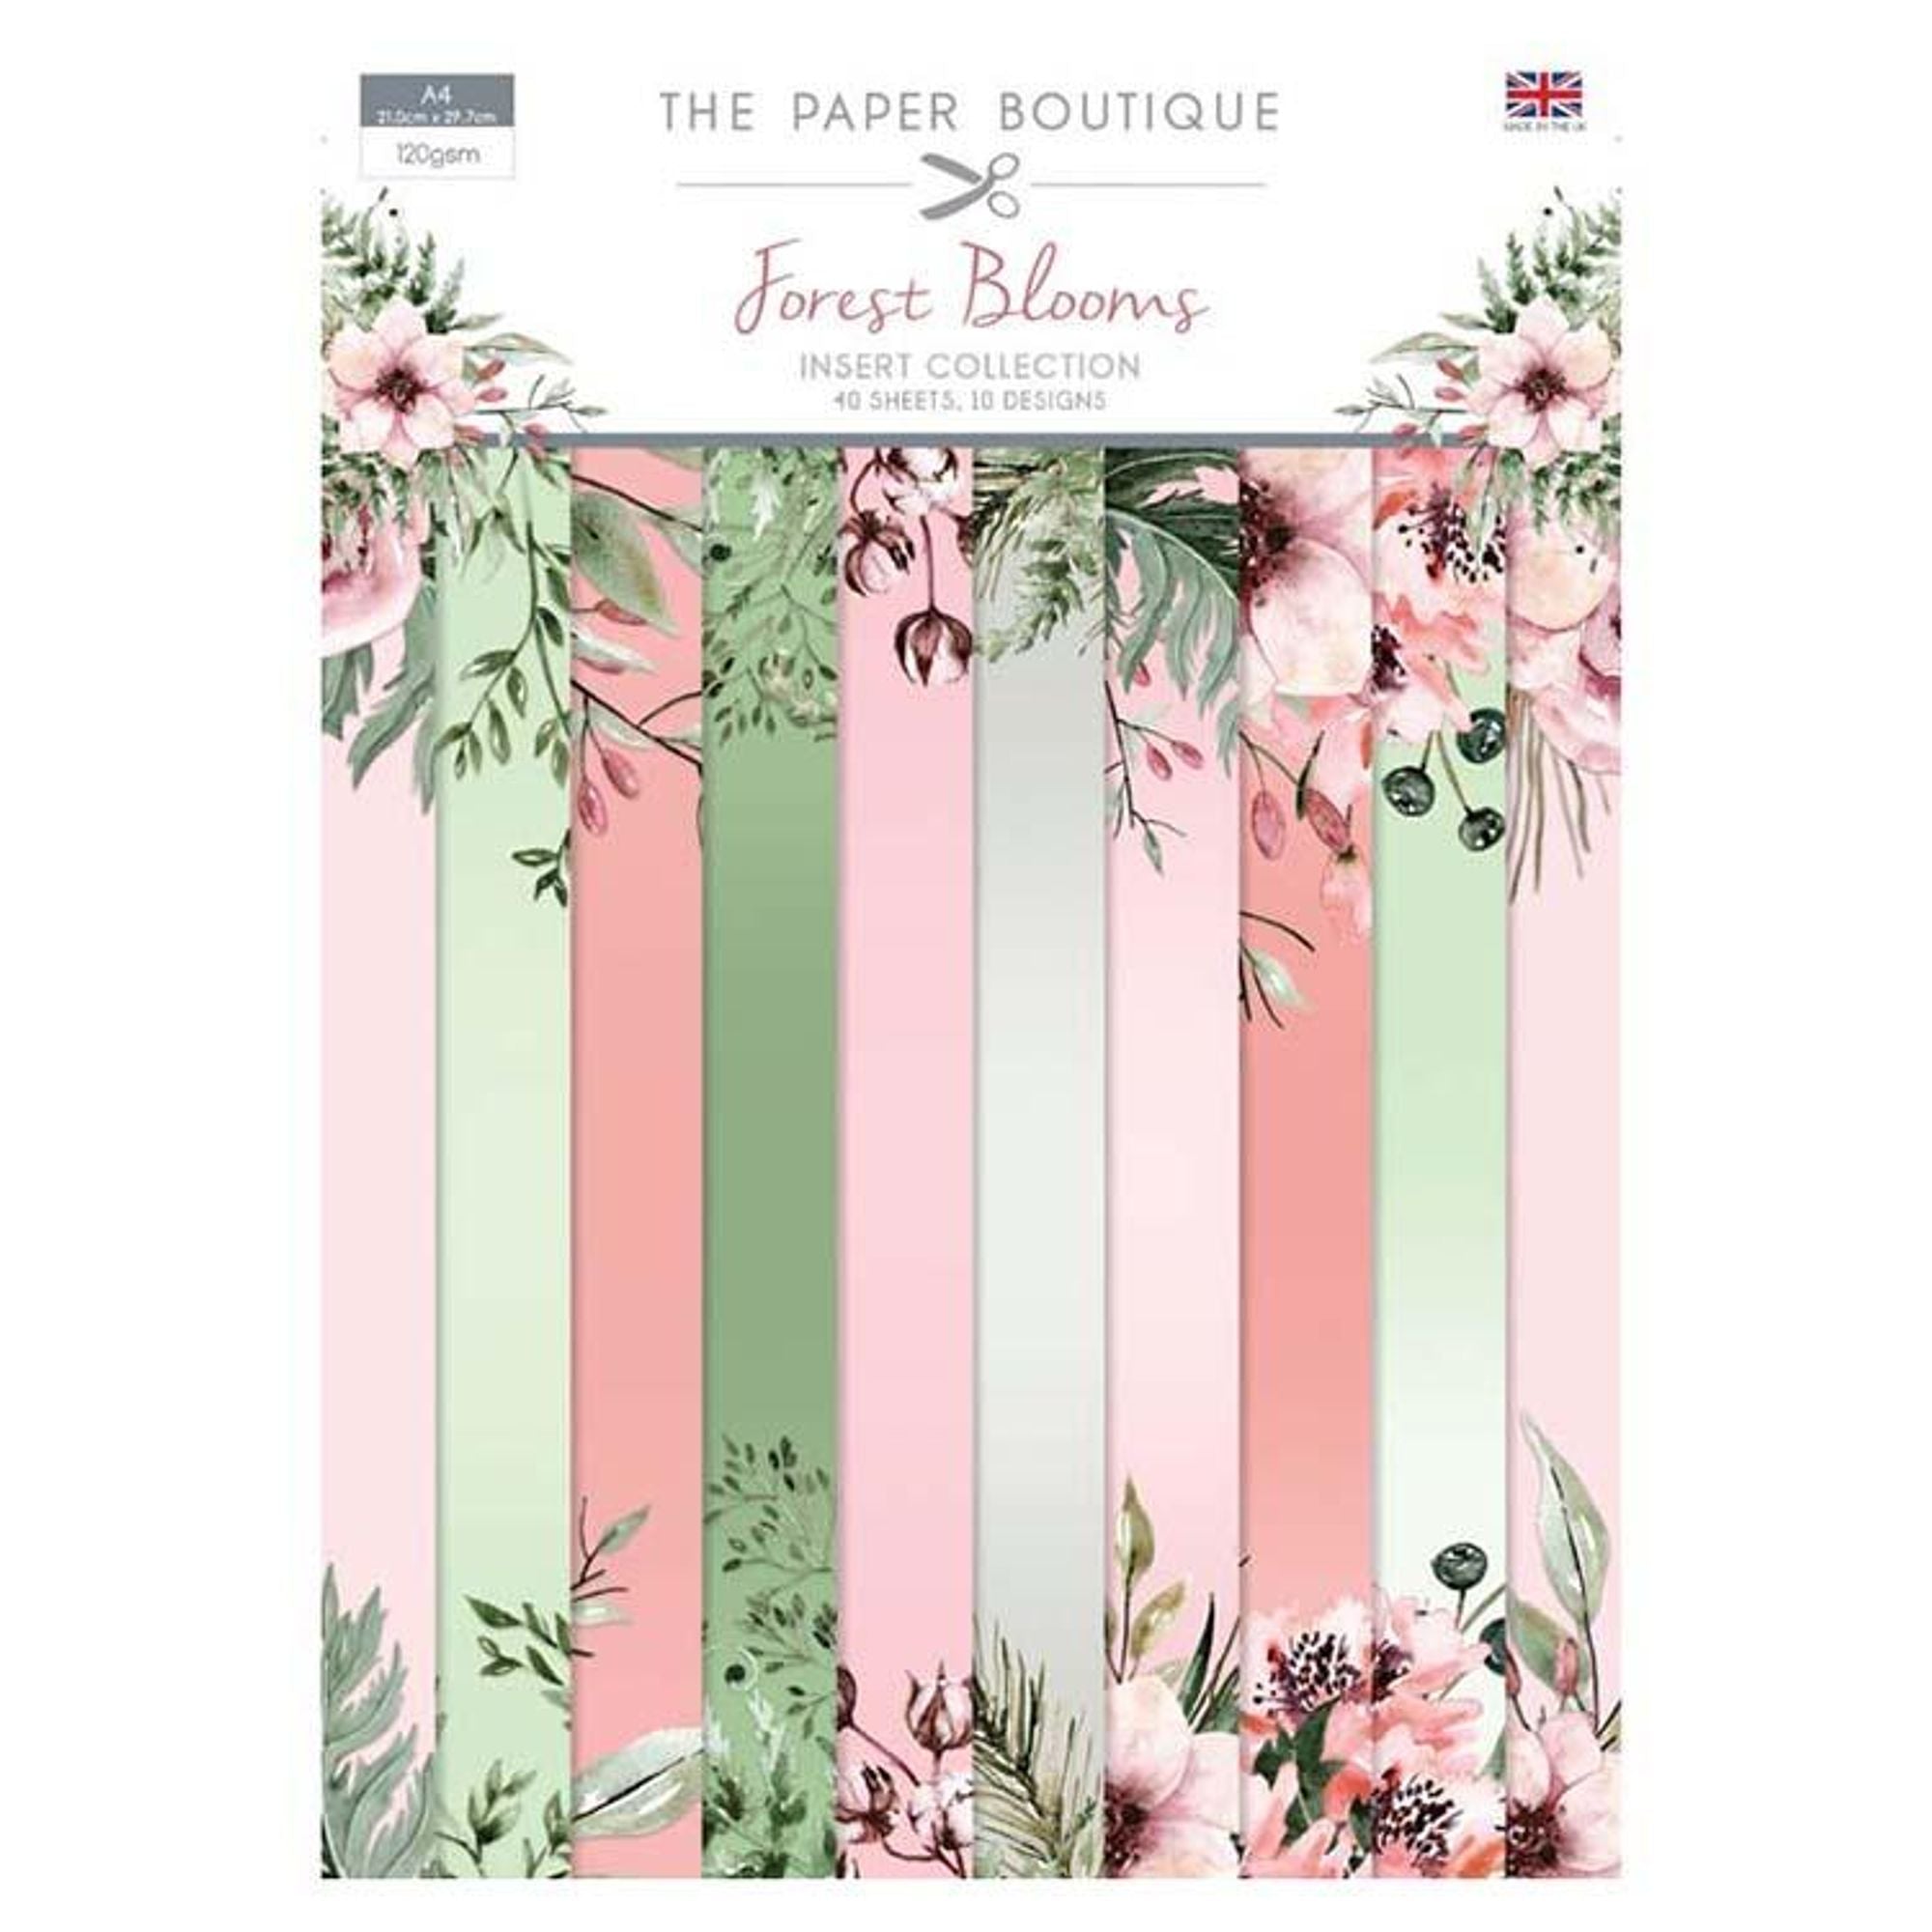 The Paper Boutique Forest Blooms Insert Collection